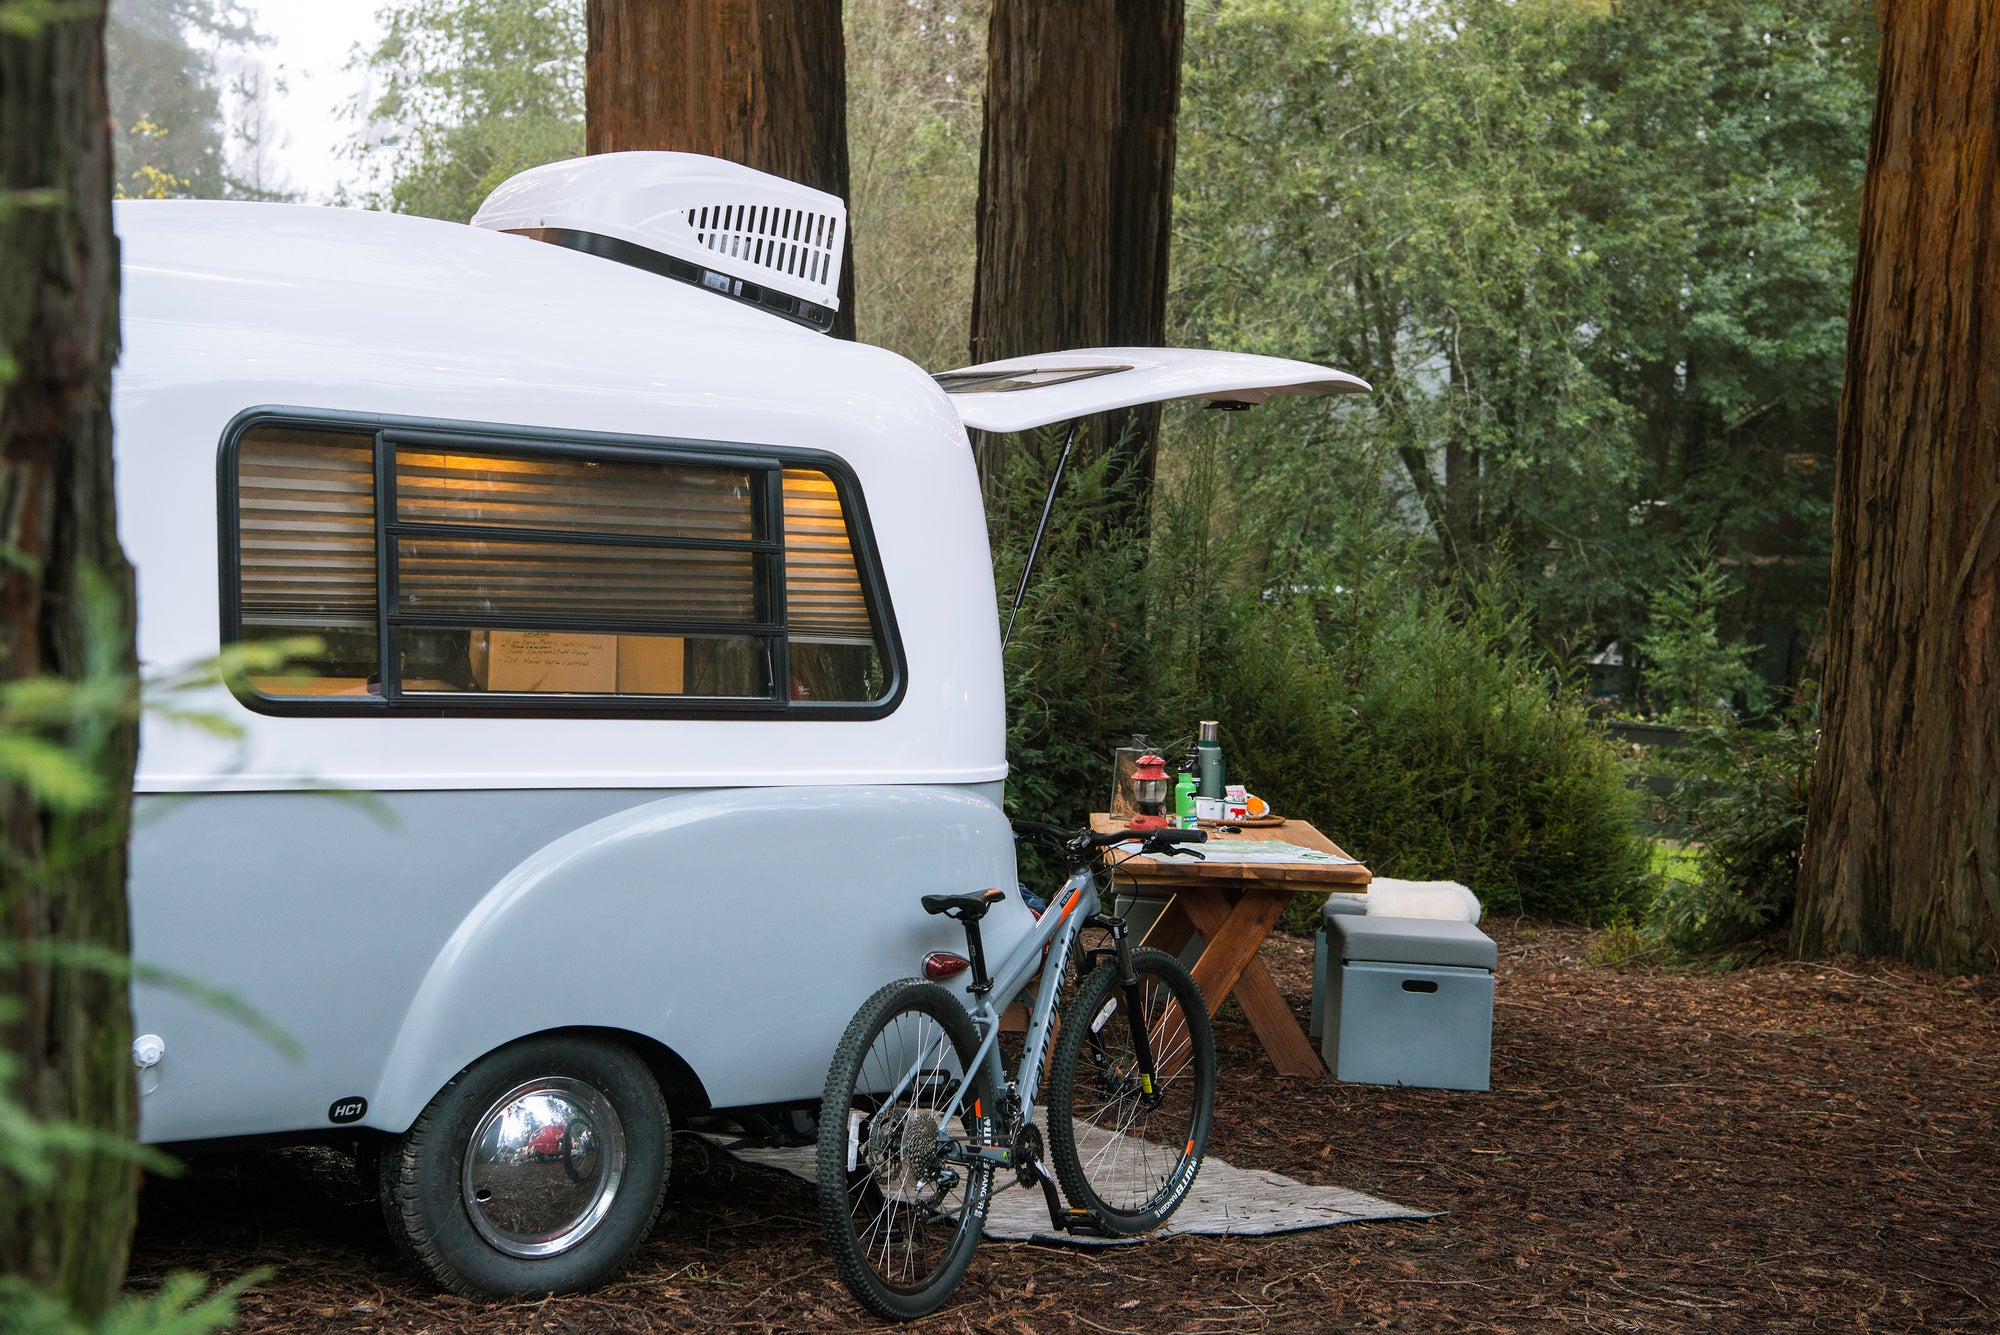 Recommended Accessories for your Happier Camper